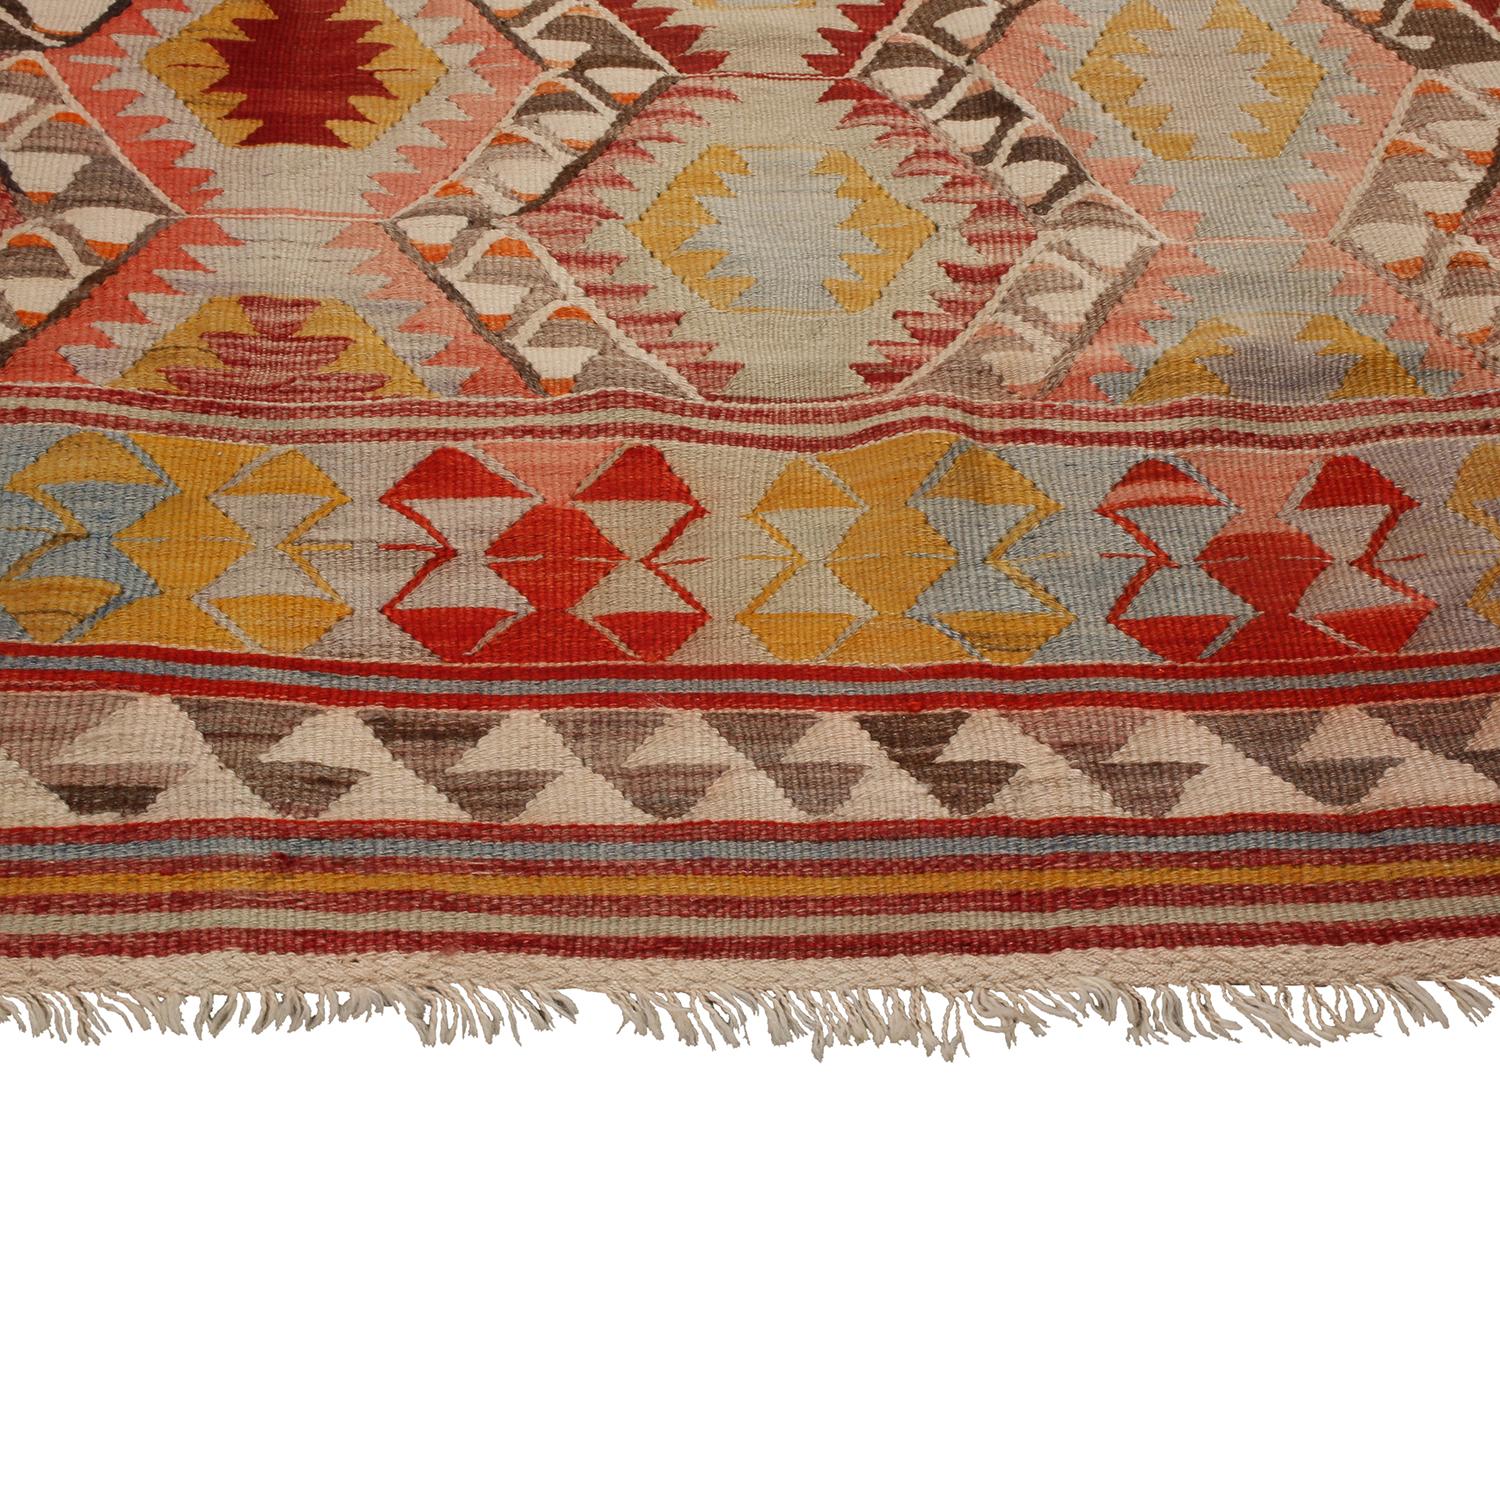 Hand-Woven Vintage Fathiye Pastel Blue and Pink Wool Kilim Rug with Vibrant Accents